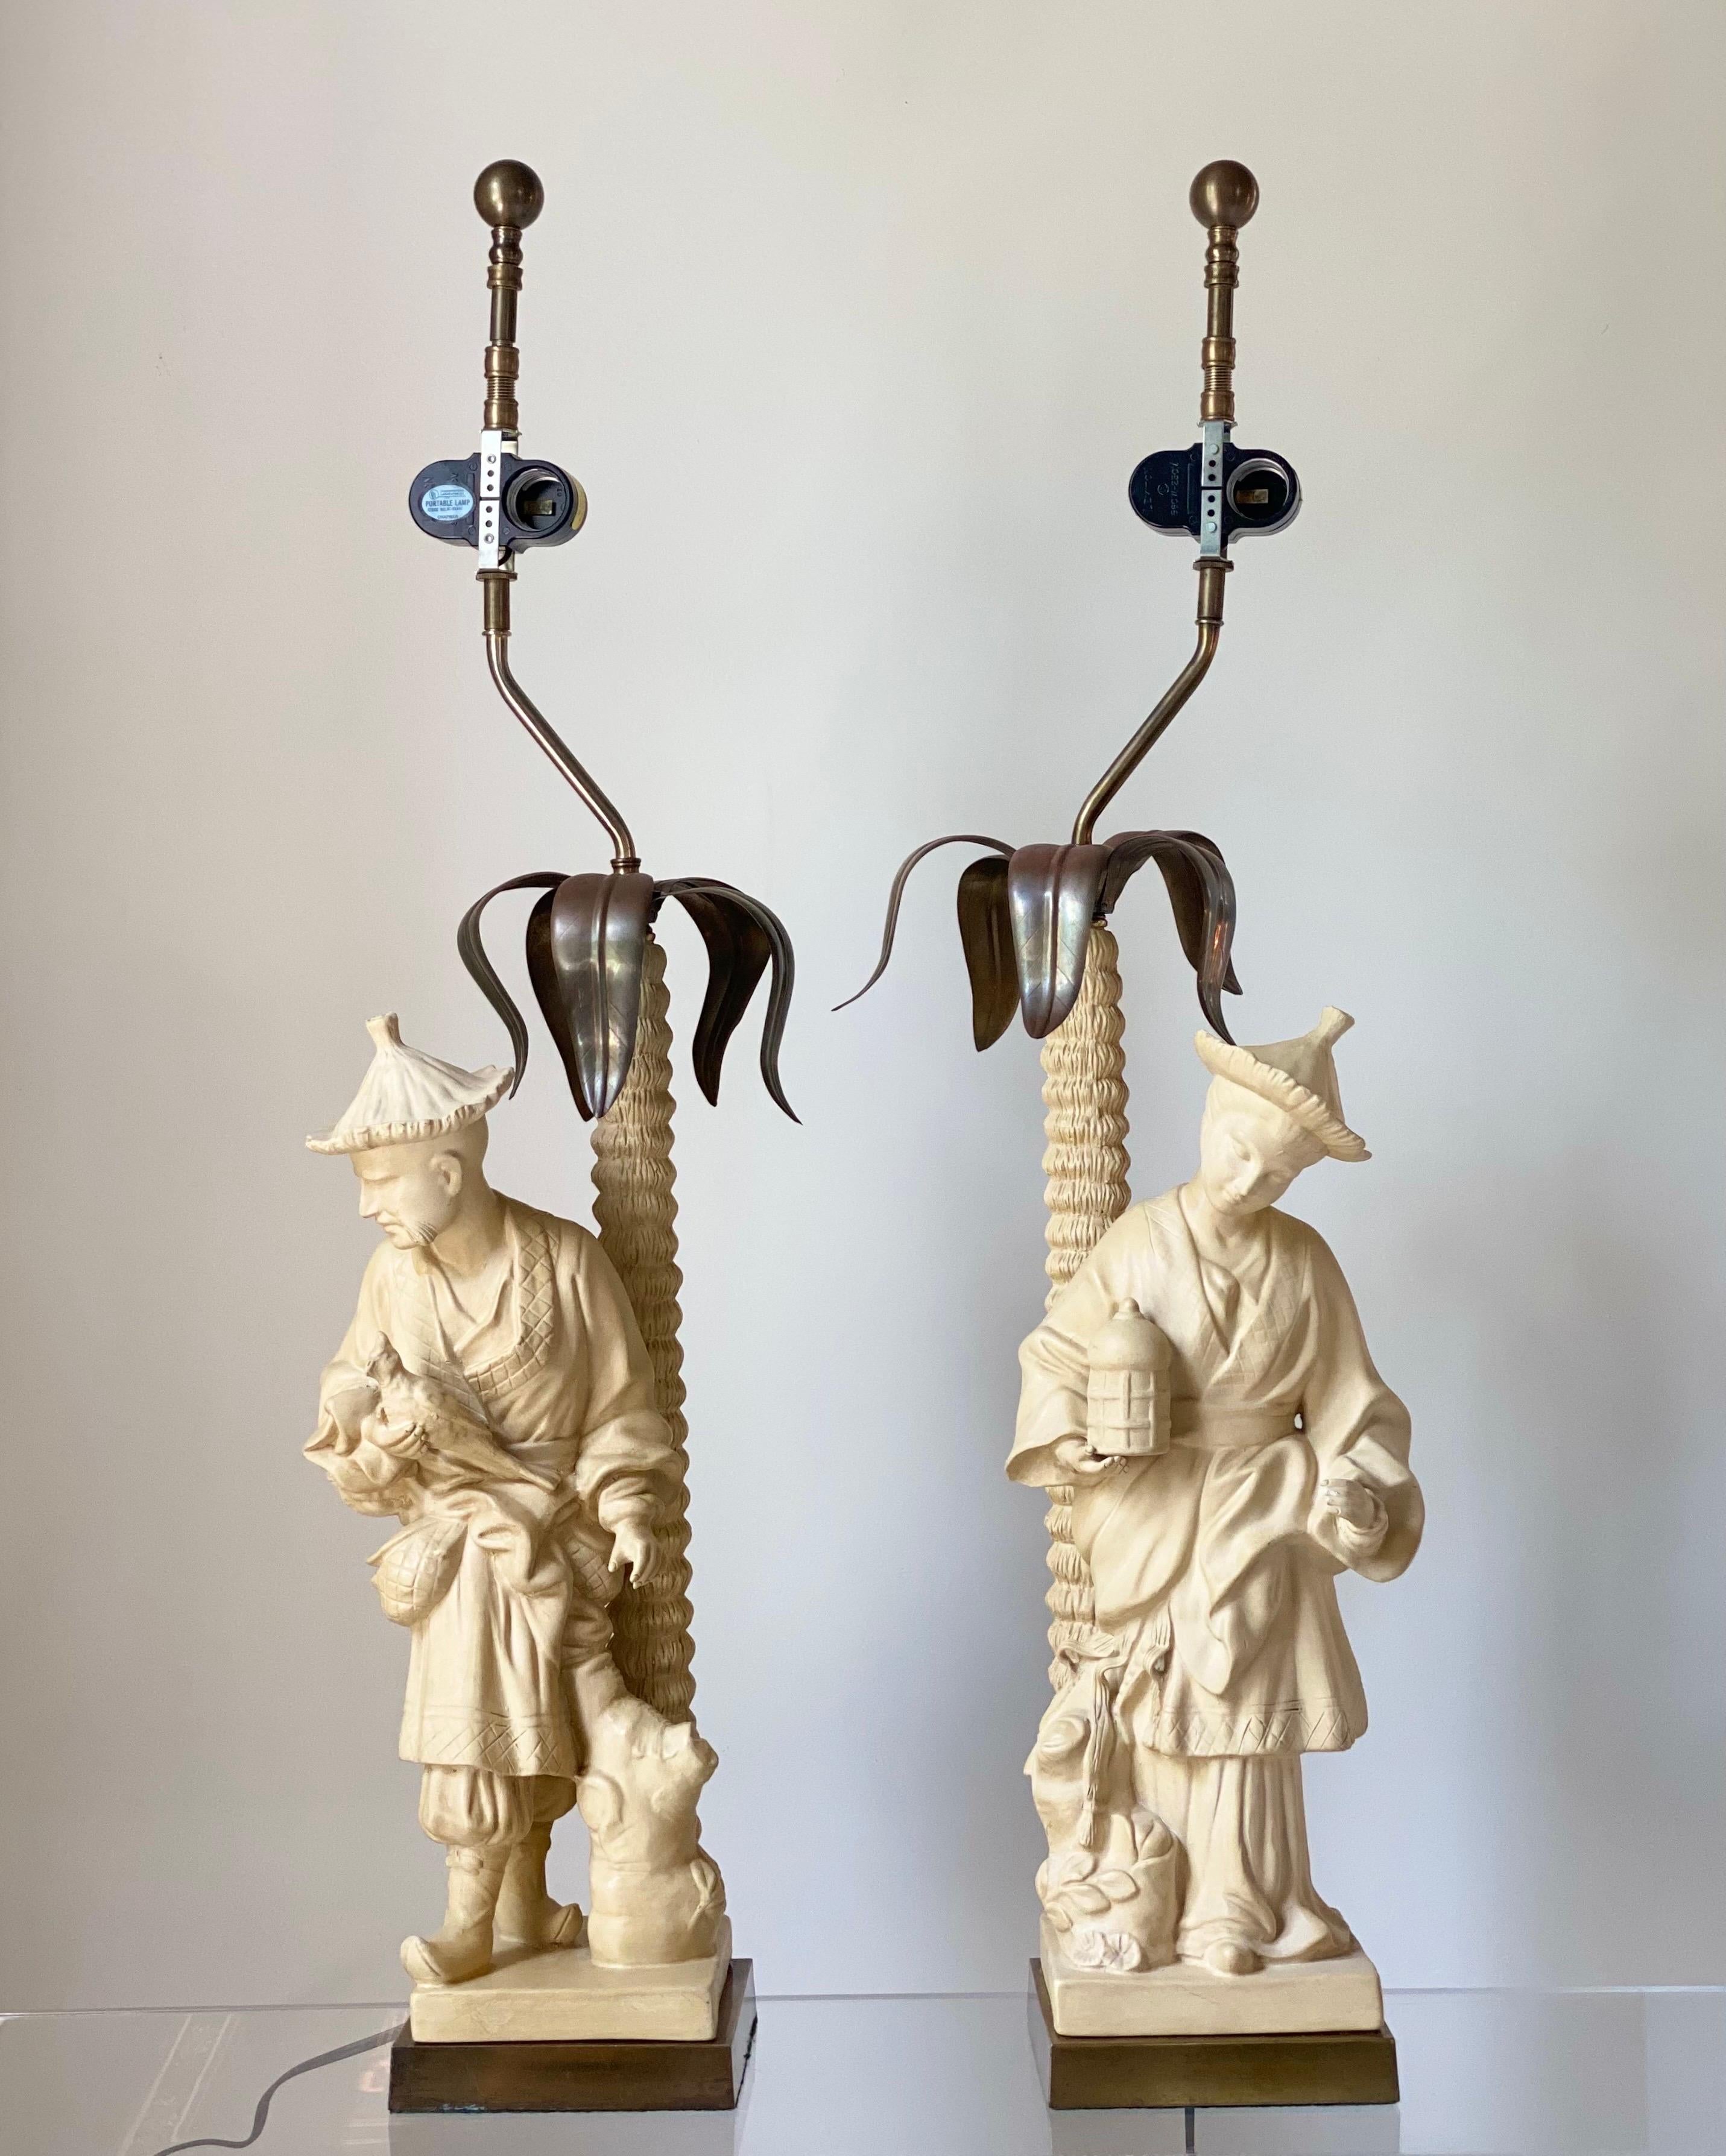 We are very pleased to offer an exquisite pair of sculpted, vintage chinoiserie style table lamps by Chapman, circa the 1980s. Create a beautiful visual in your space with this porcelain pair, full of traditional Asian details. Elongated figurines